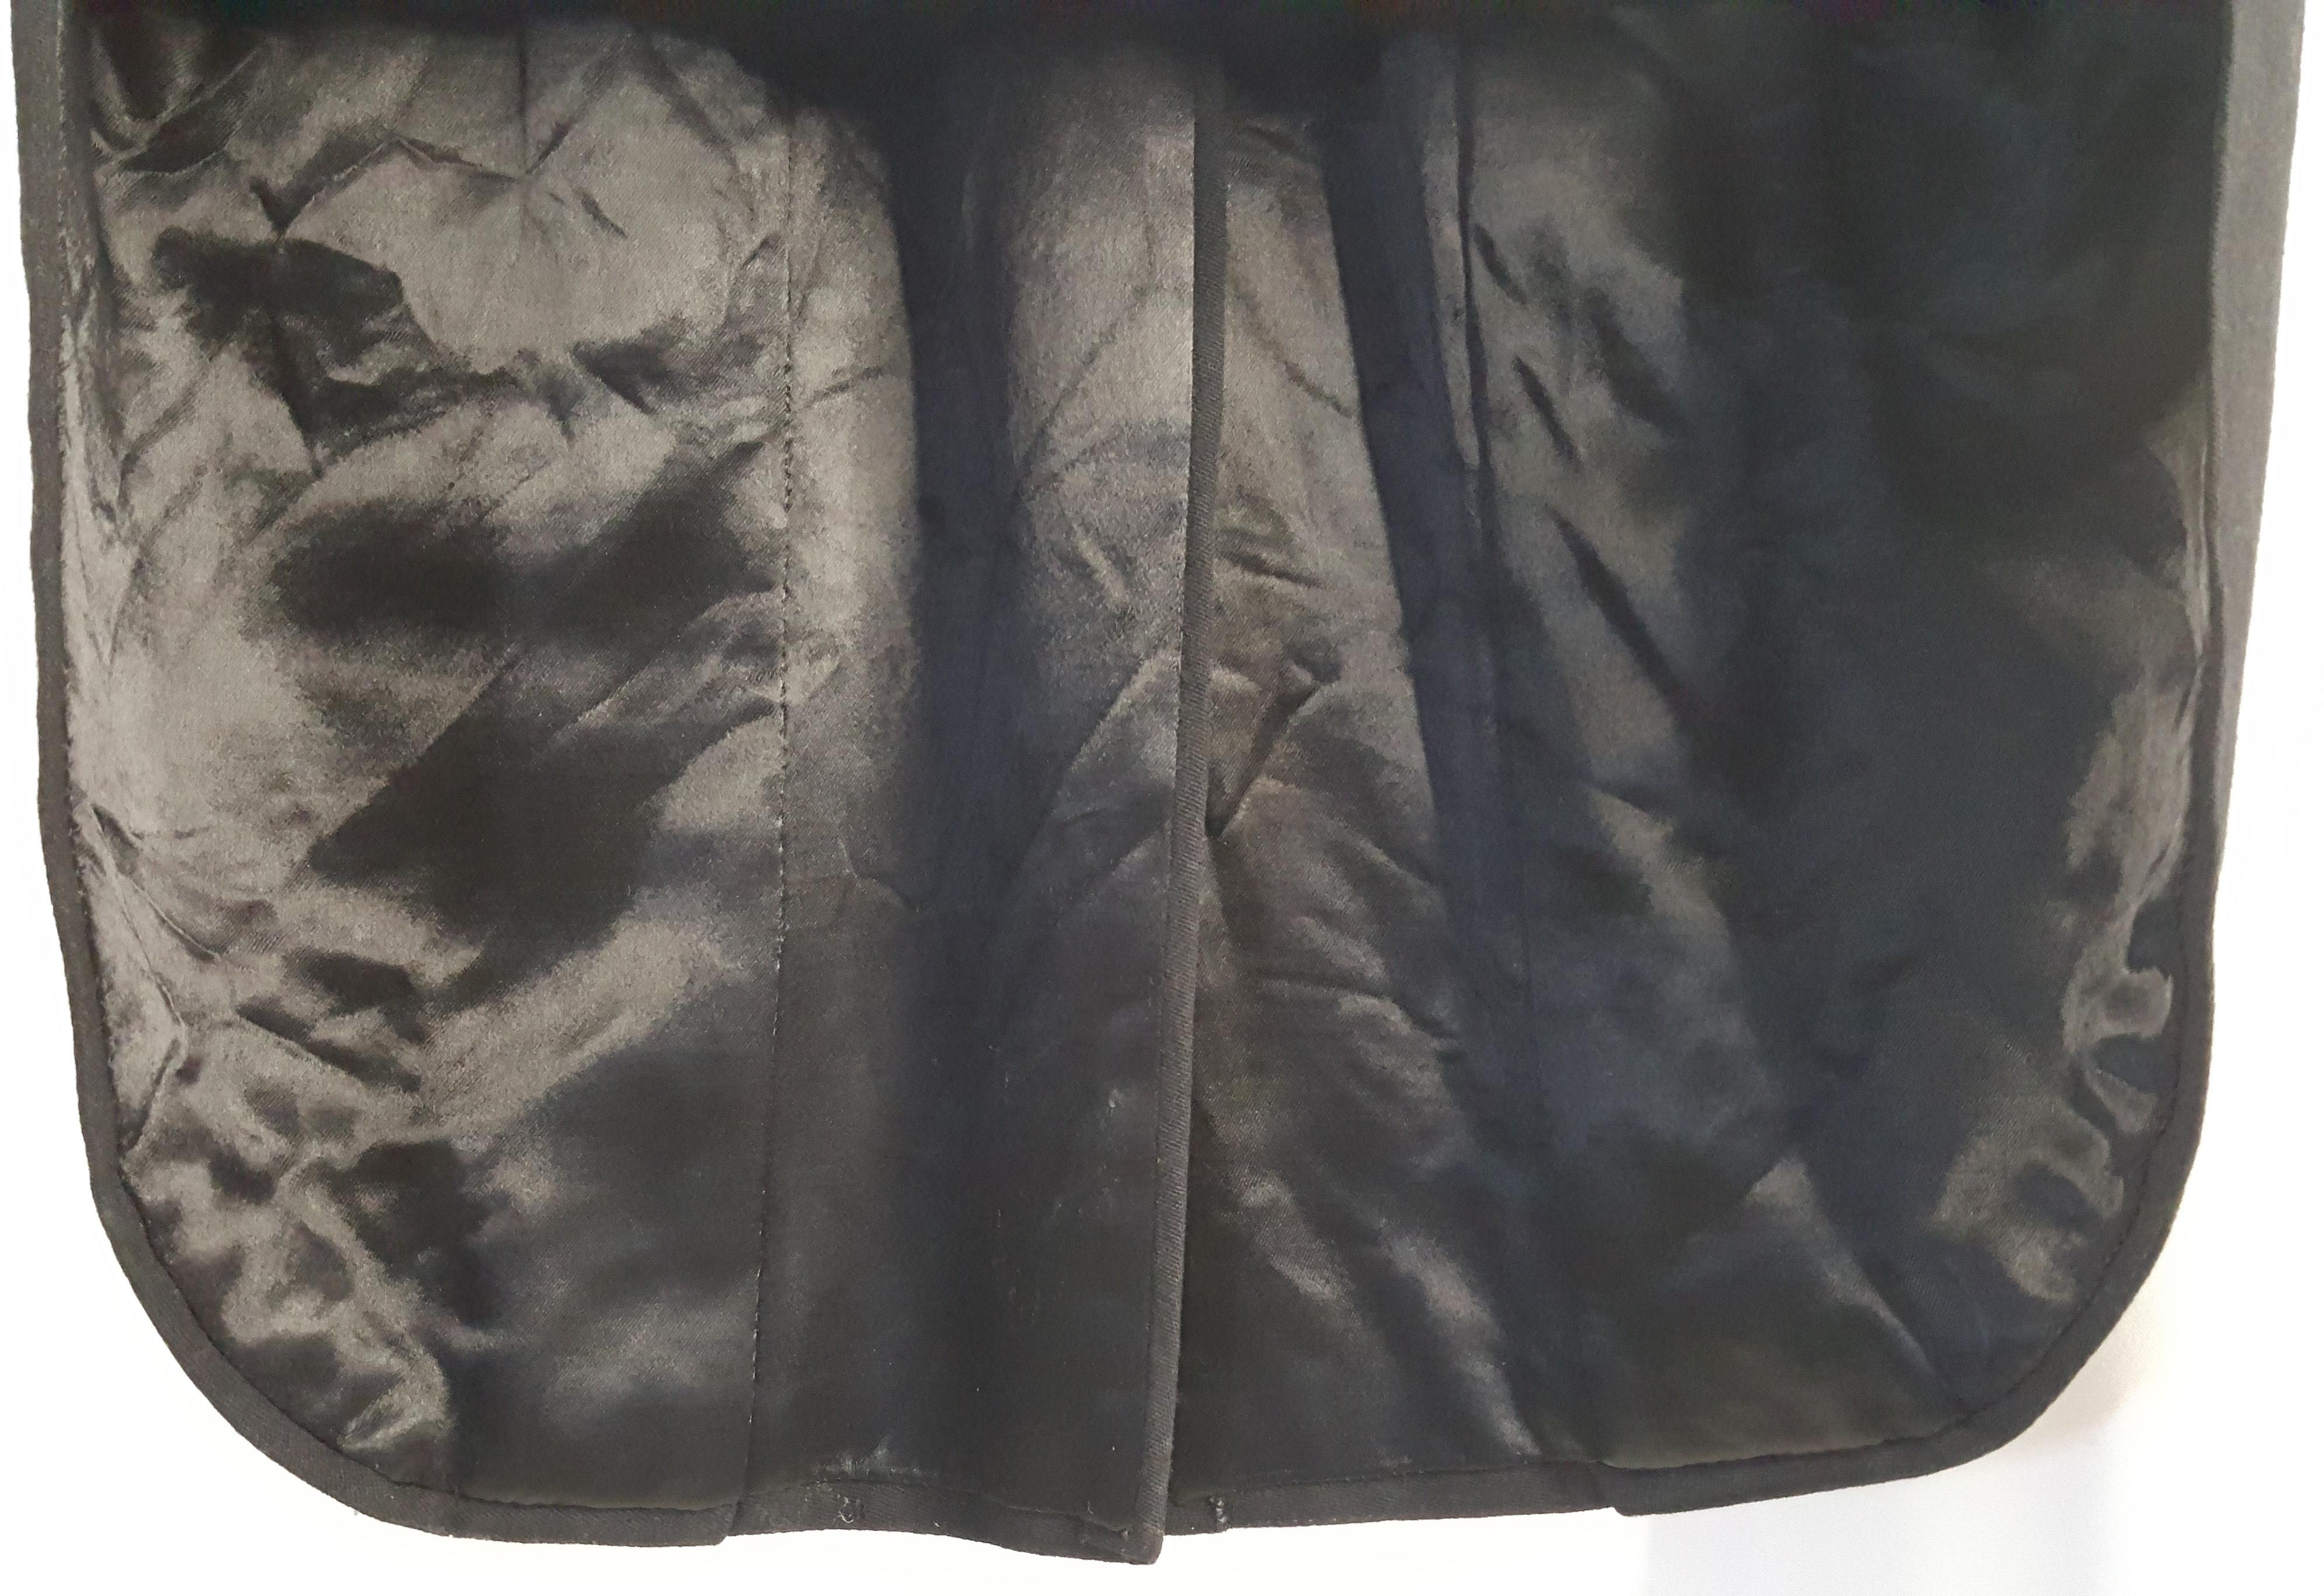 Couture Antique Tuxedo Wool Ribbed&QuiltedSatin FullyLined&Padded Black Tailcoat For Sale 6